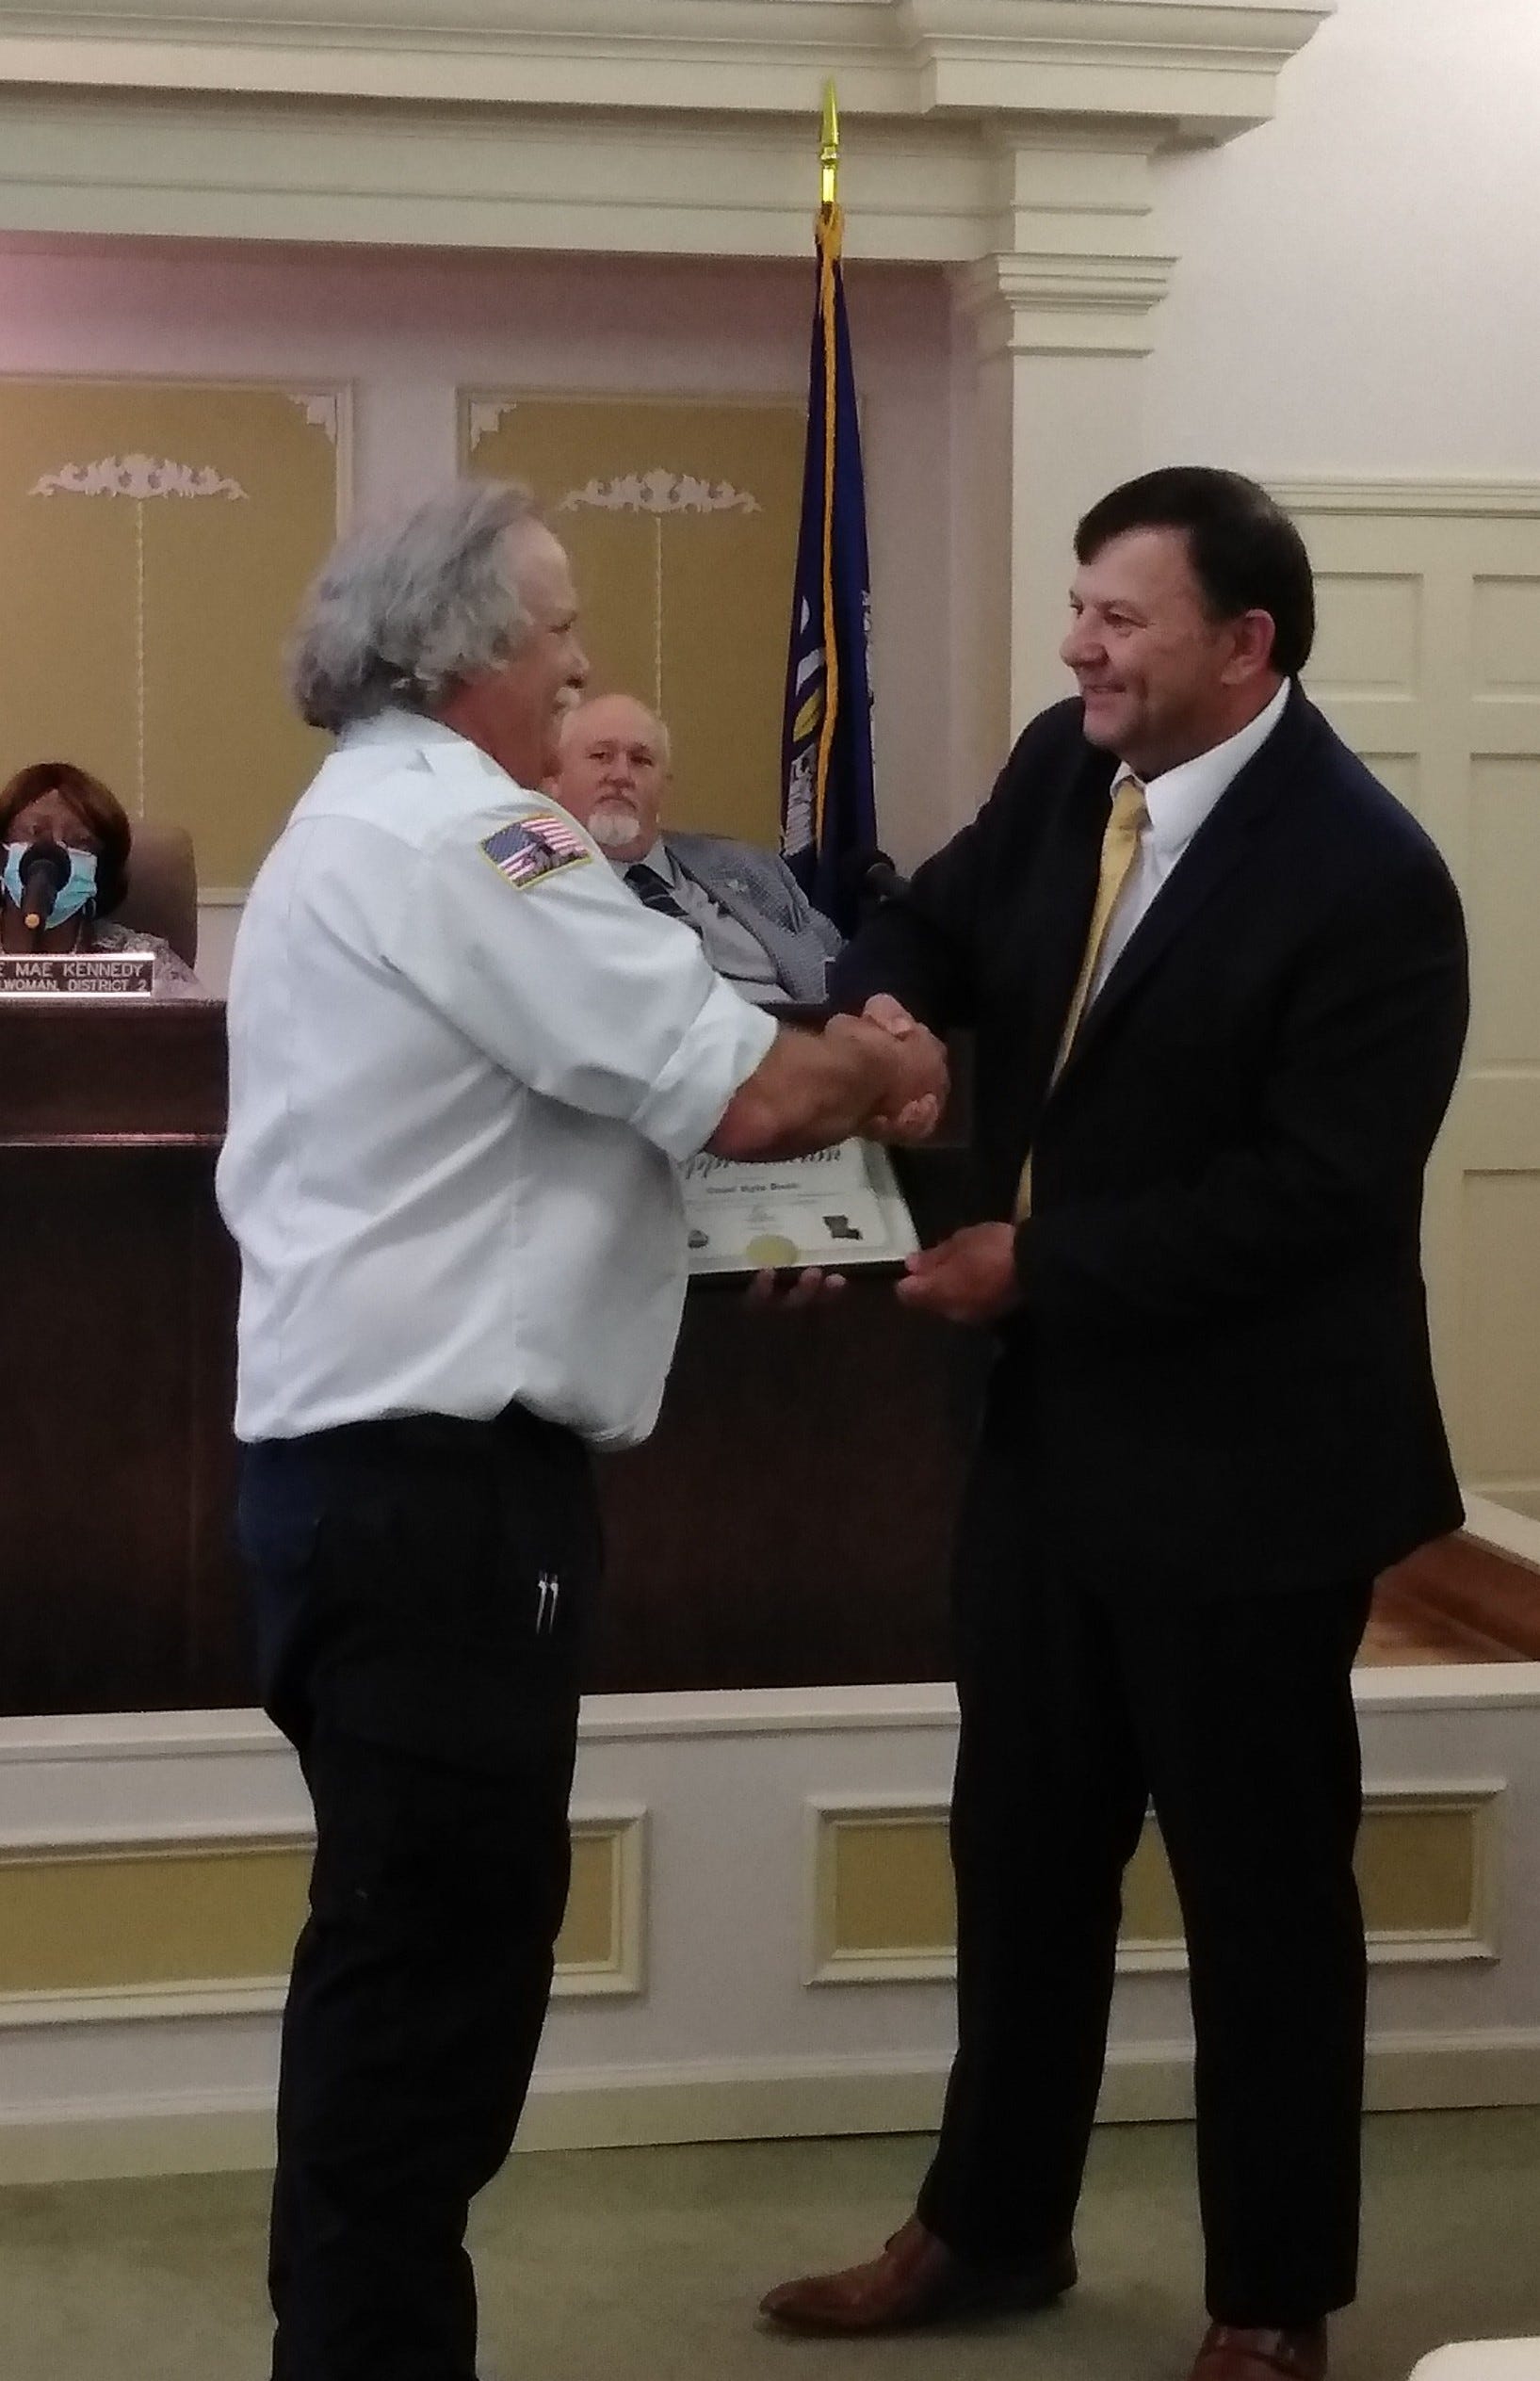 Chief Kyle Bush was recognized by Mayor Rick Allen for his years of dedicated service.